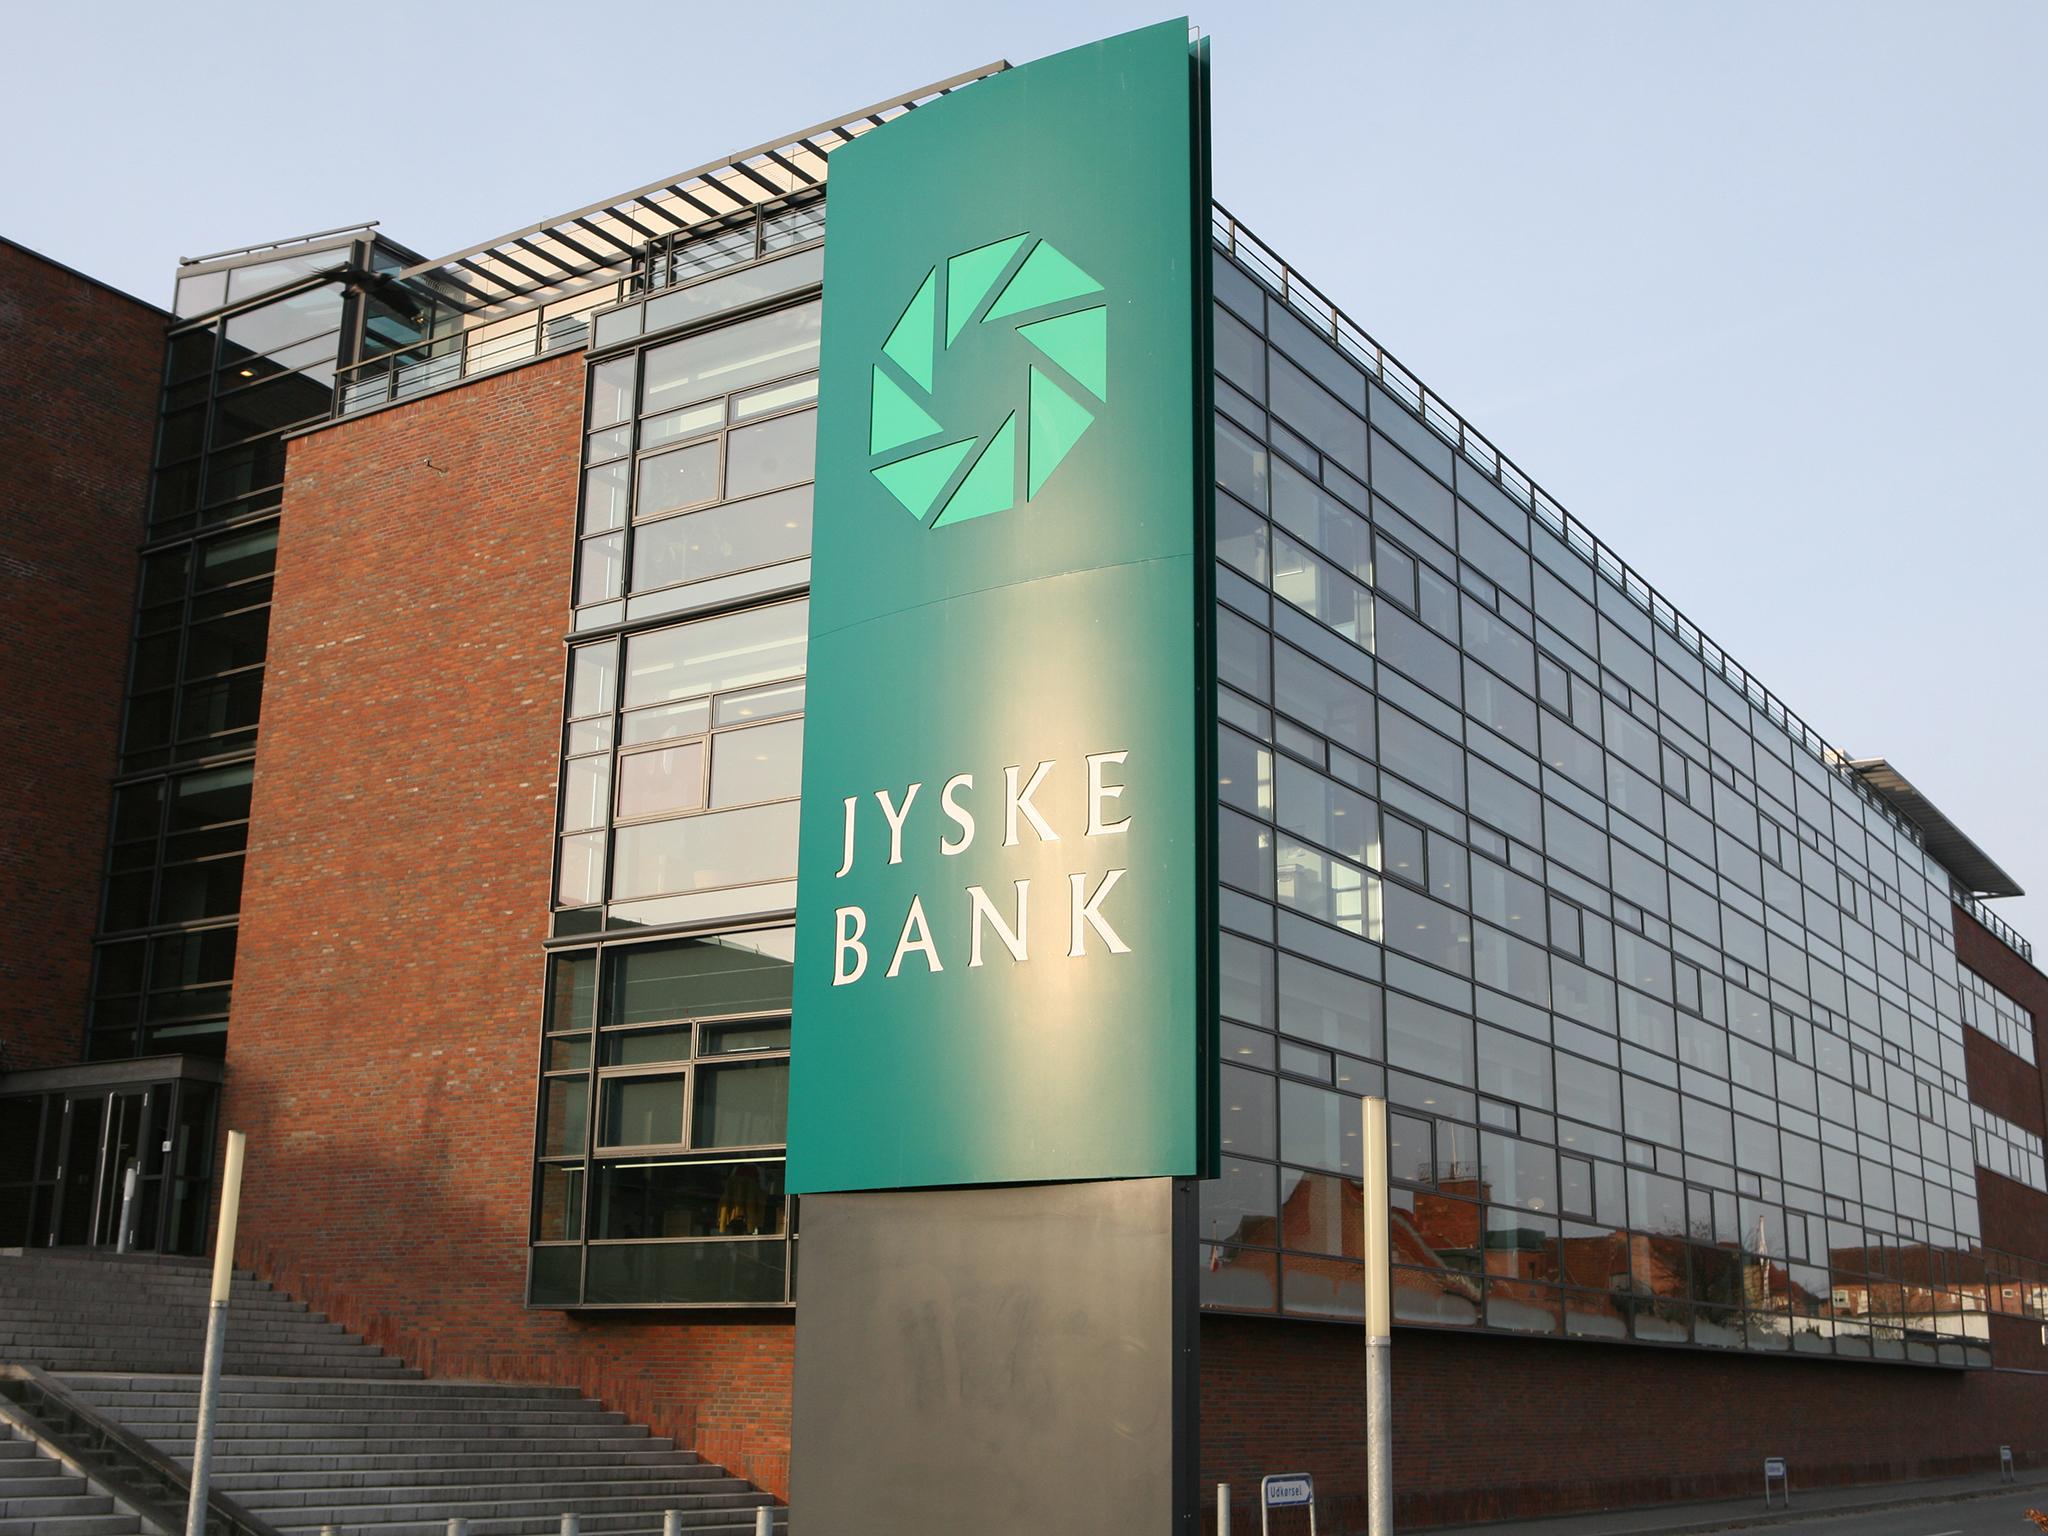 The bank will impose a negative interest rate of 0.6 per cent for clients who deposit more than 7.5m Danish kroner